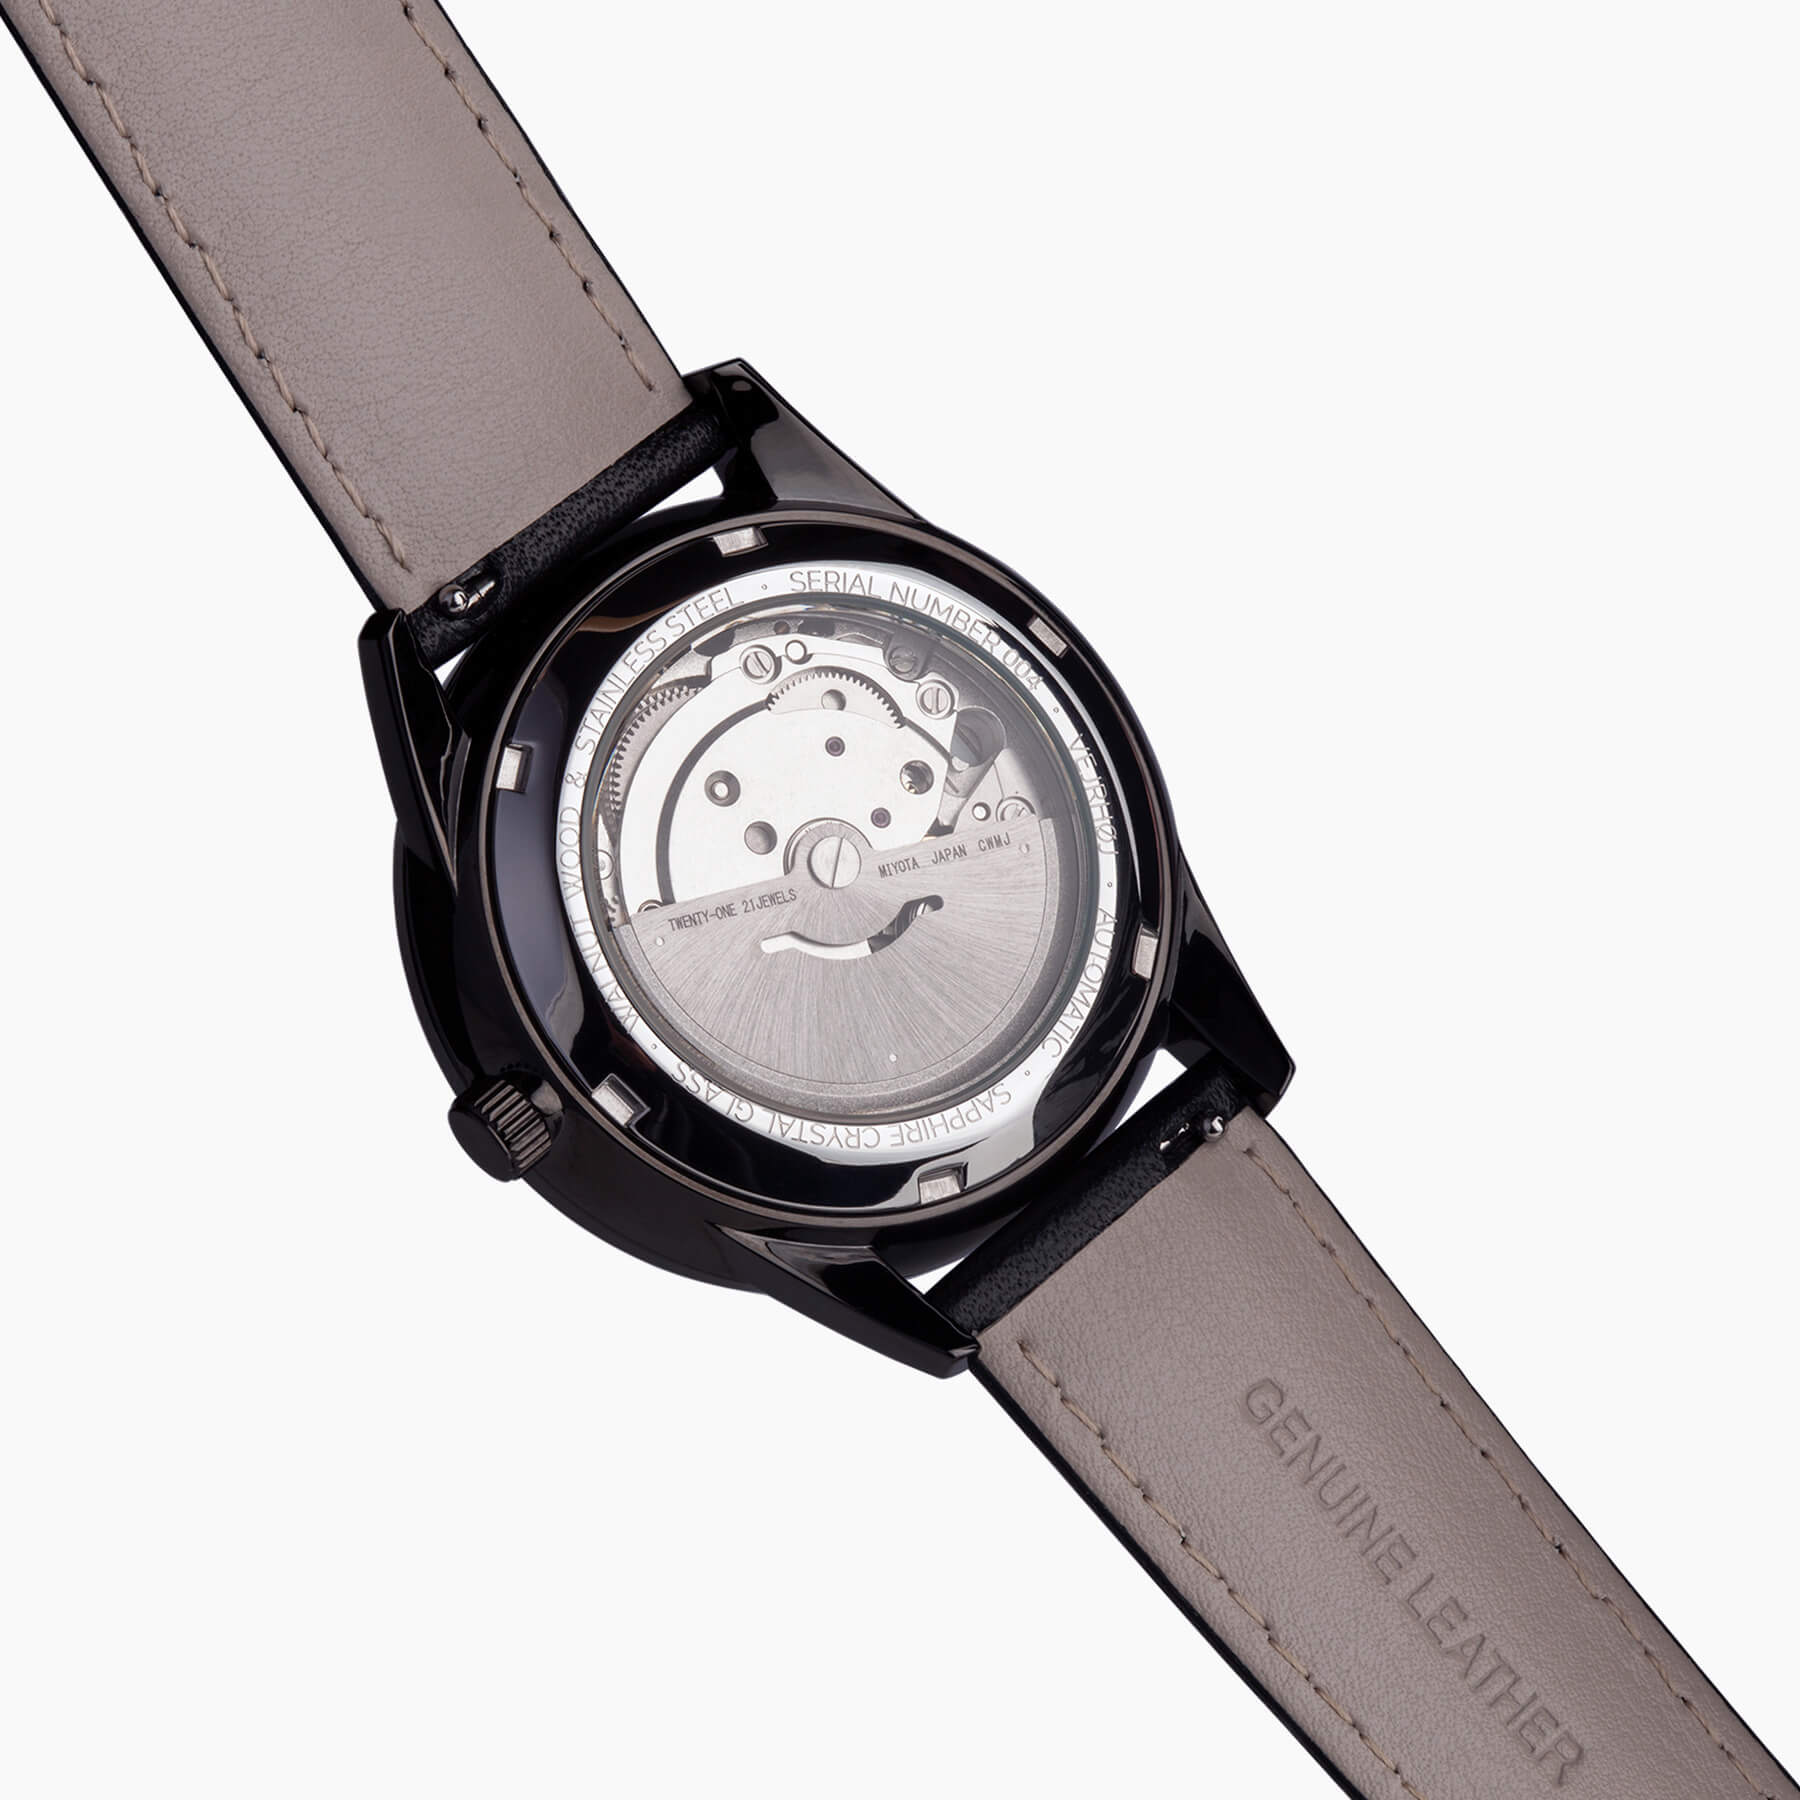 the backside of a black automatic watch showing a inner mechanism of a watch